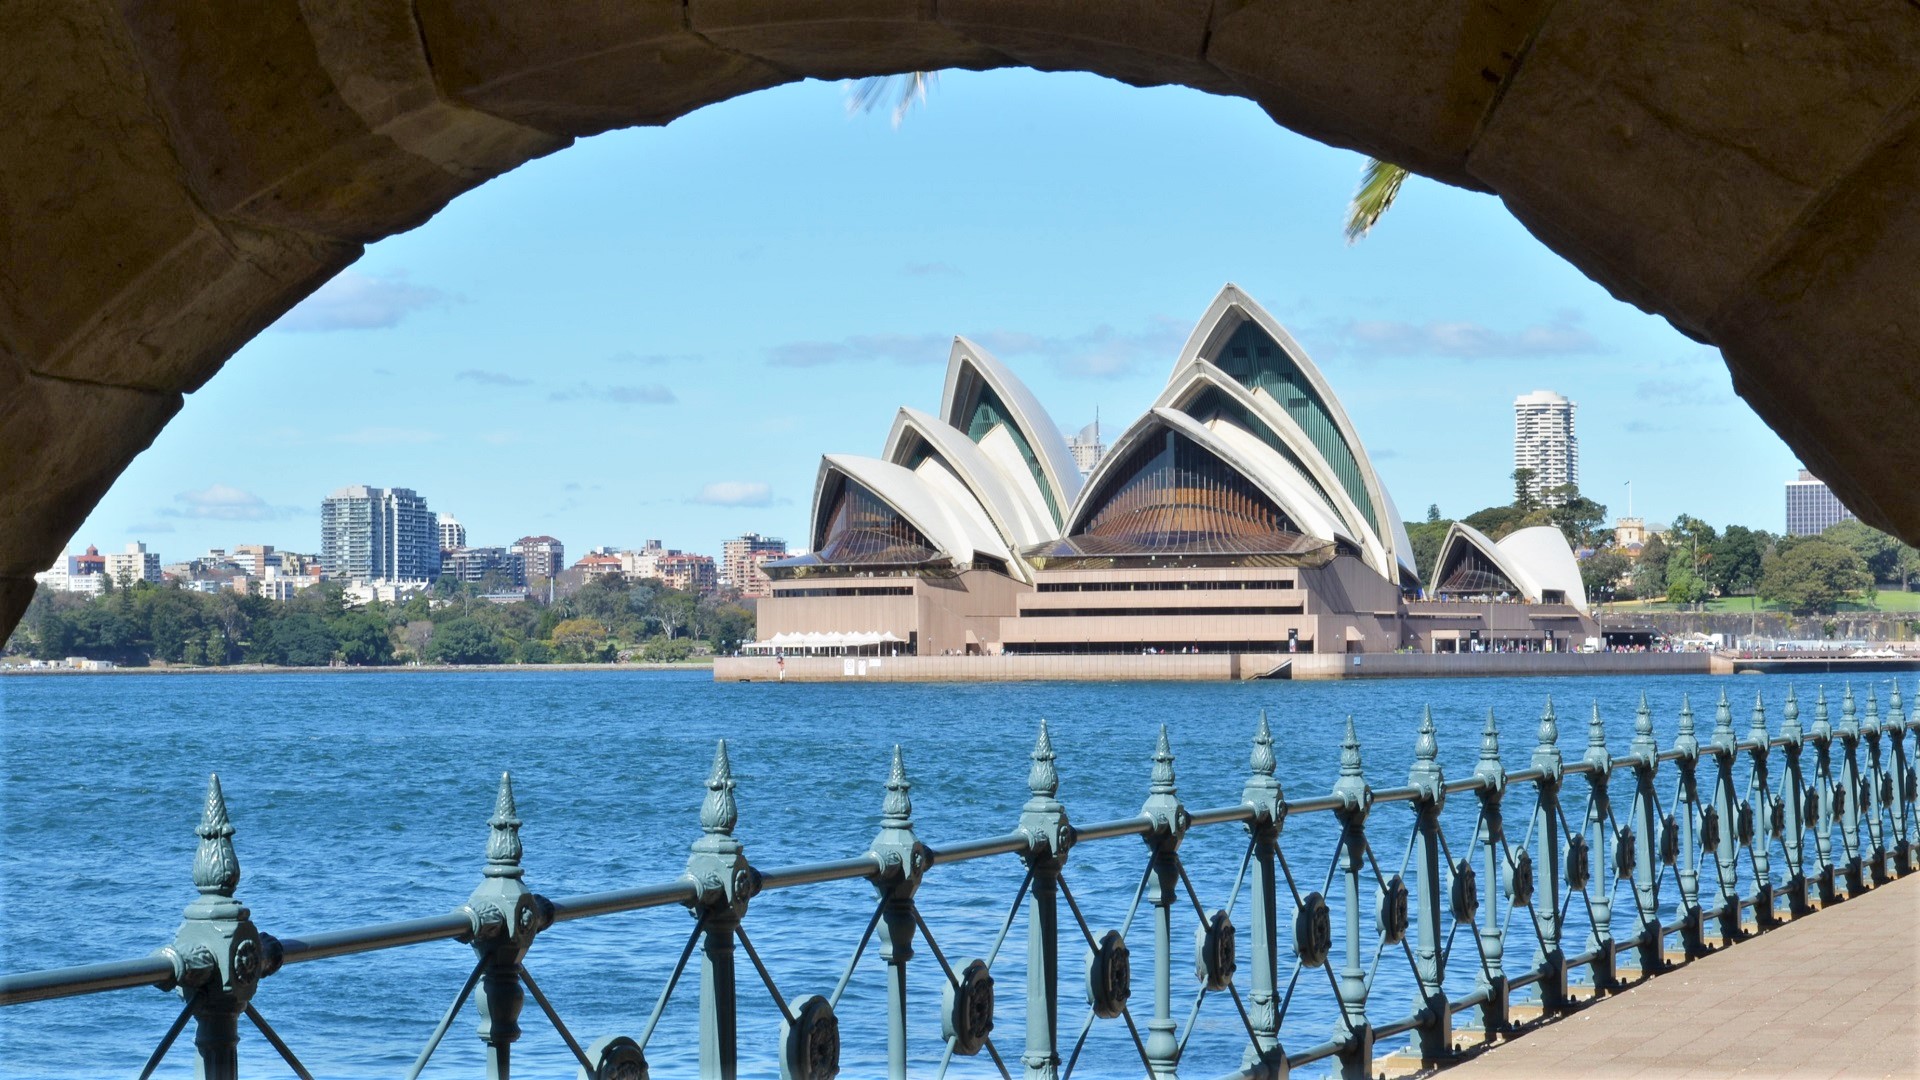 Sydney Opera House through an Arch, Milsons Point, northern shore of Sydney Harbour by lonewolf6738